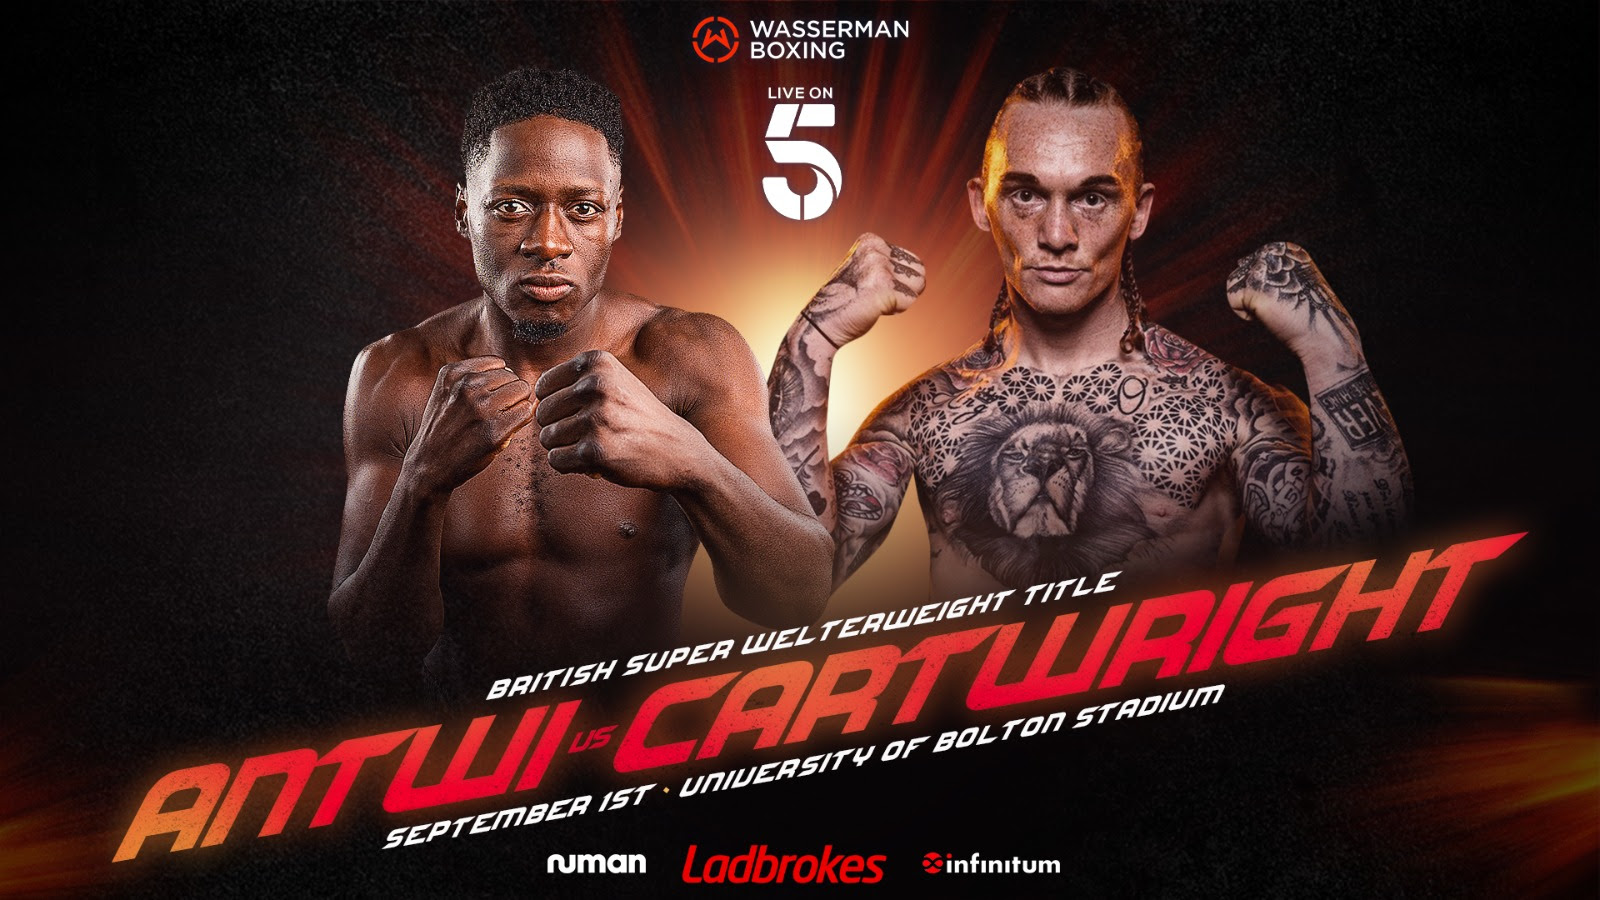 British title fight between Antwi & Cartwright confirmed for September 1st